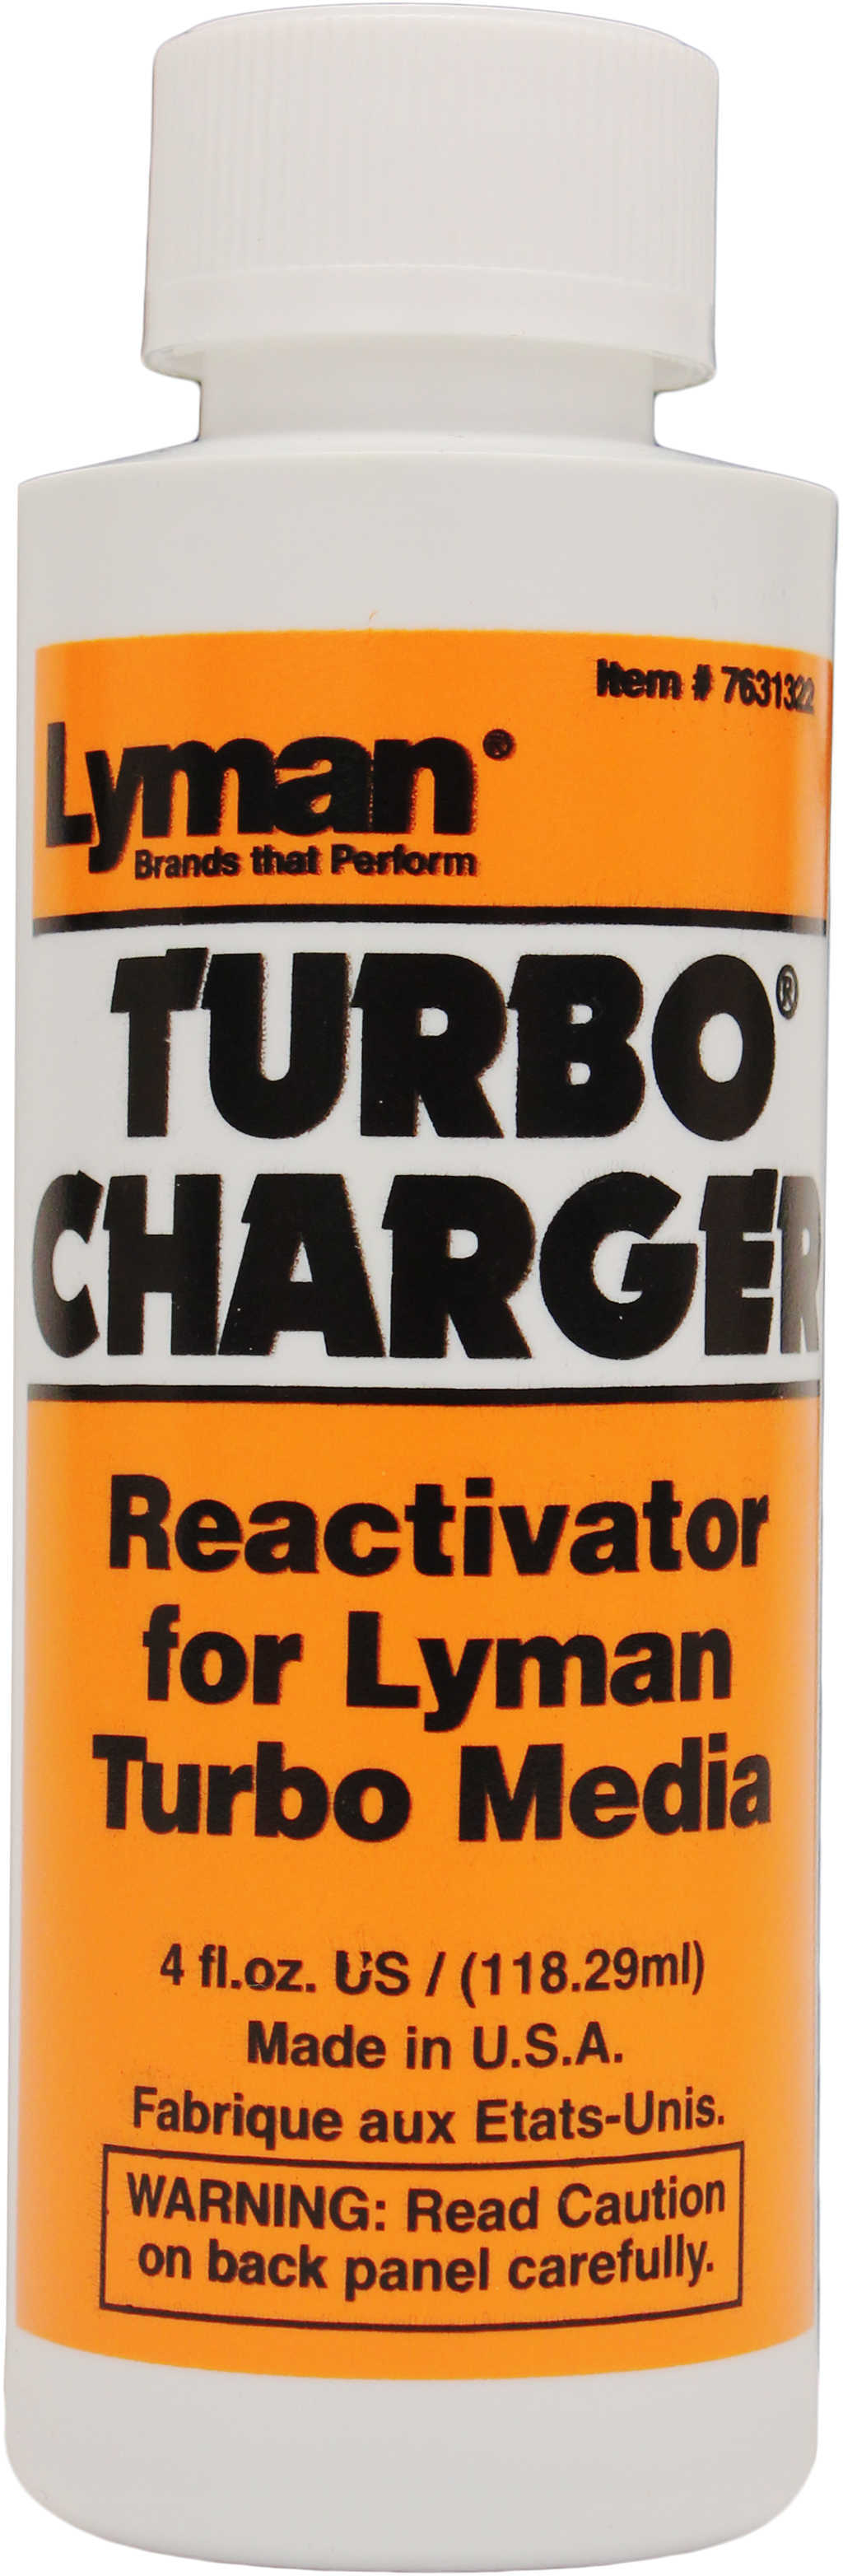 Lyman Turbo Charger Reactivate 7631322-img-1